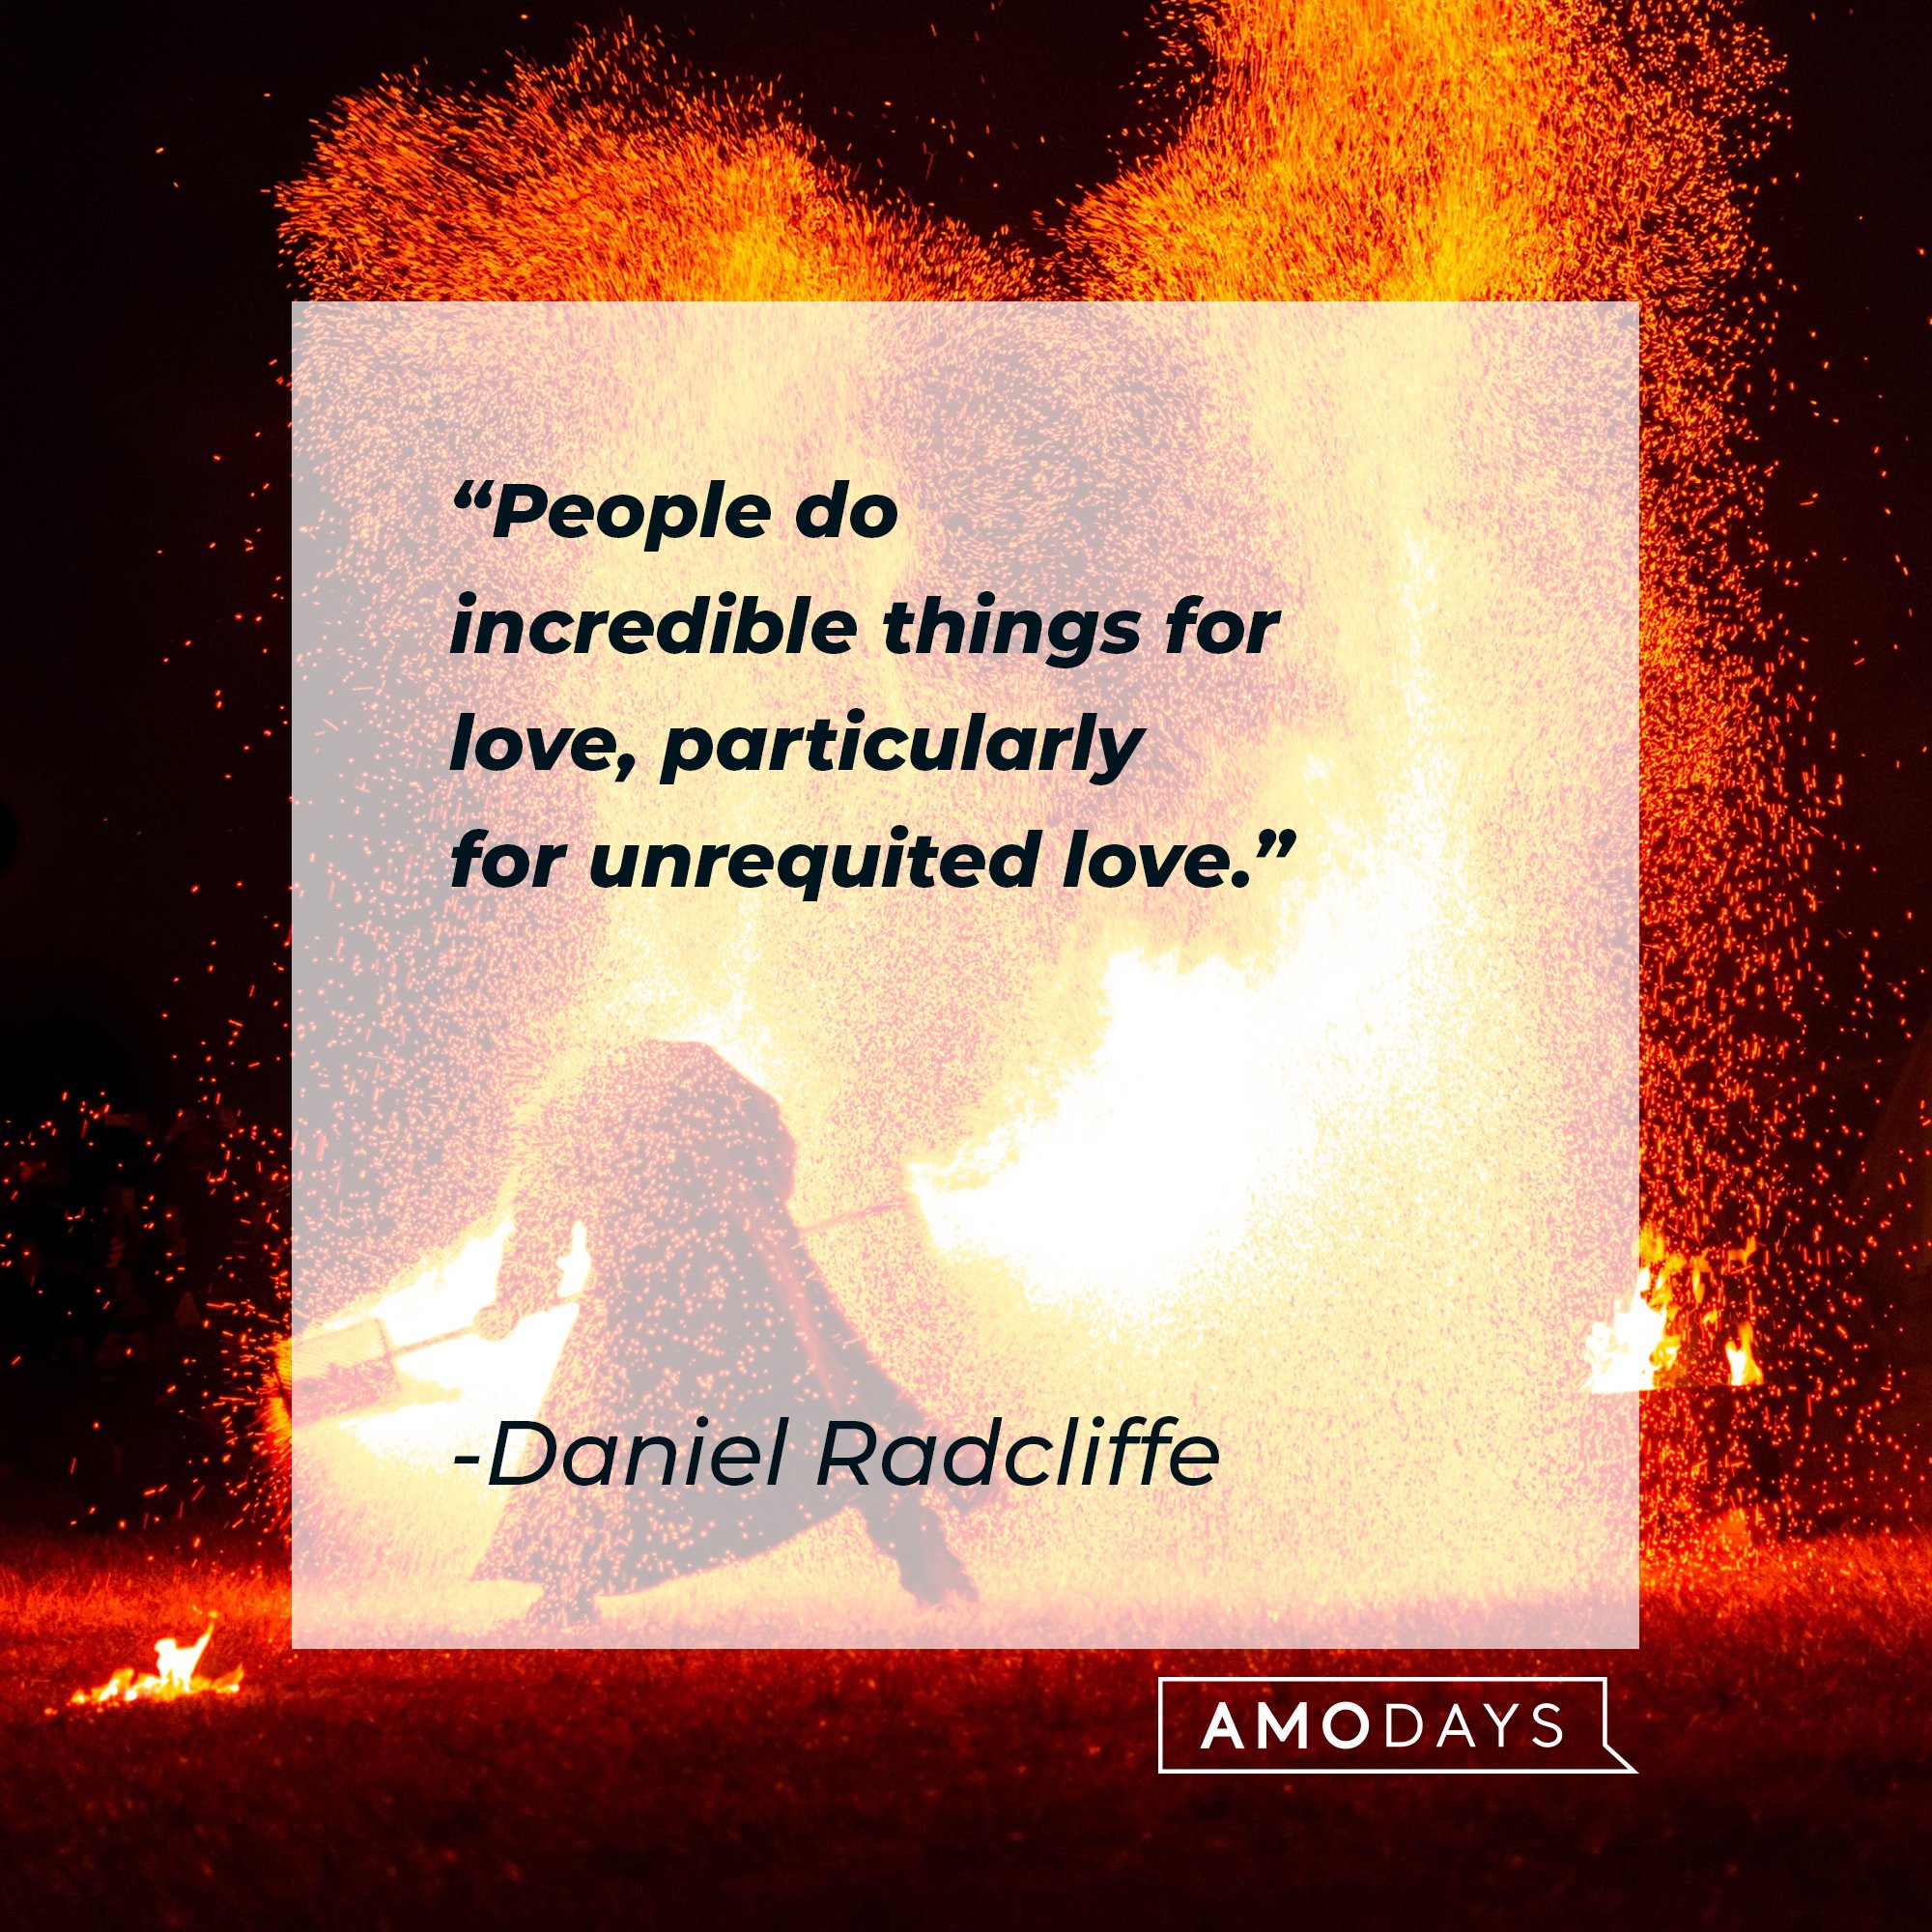  Daniel Radcliffe’s quote: "People do incredible things for love, particularly for unrequited love."  | Image: AmoDays